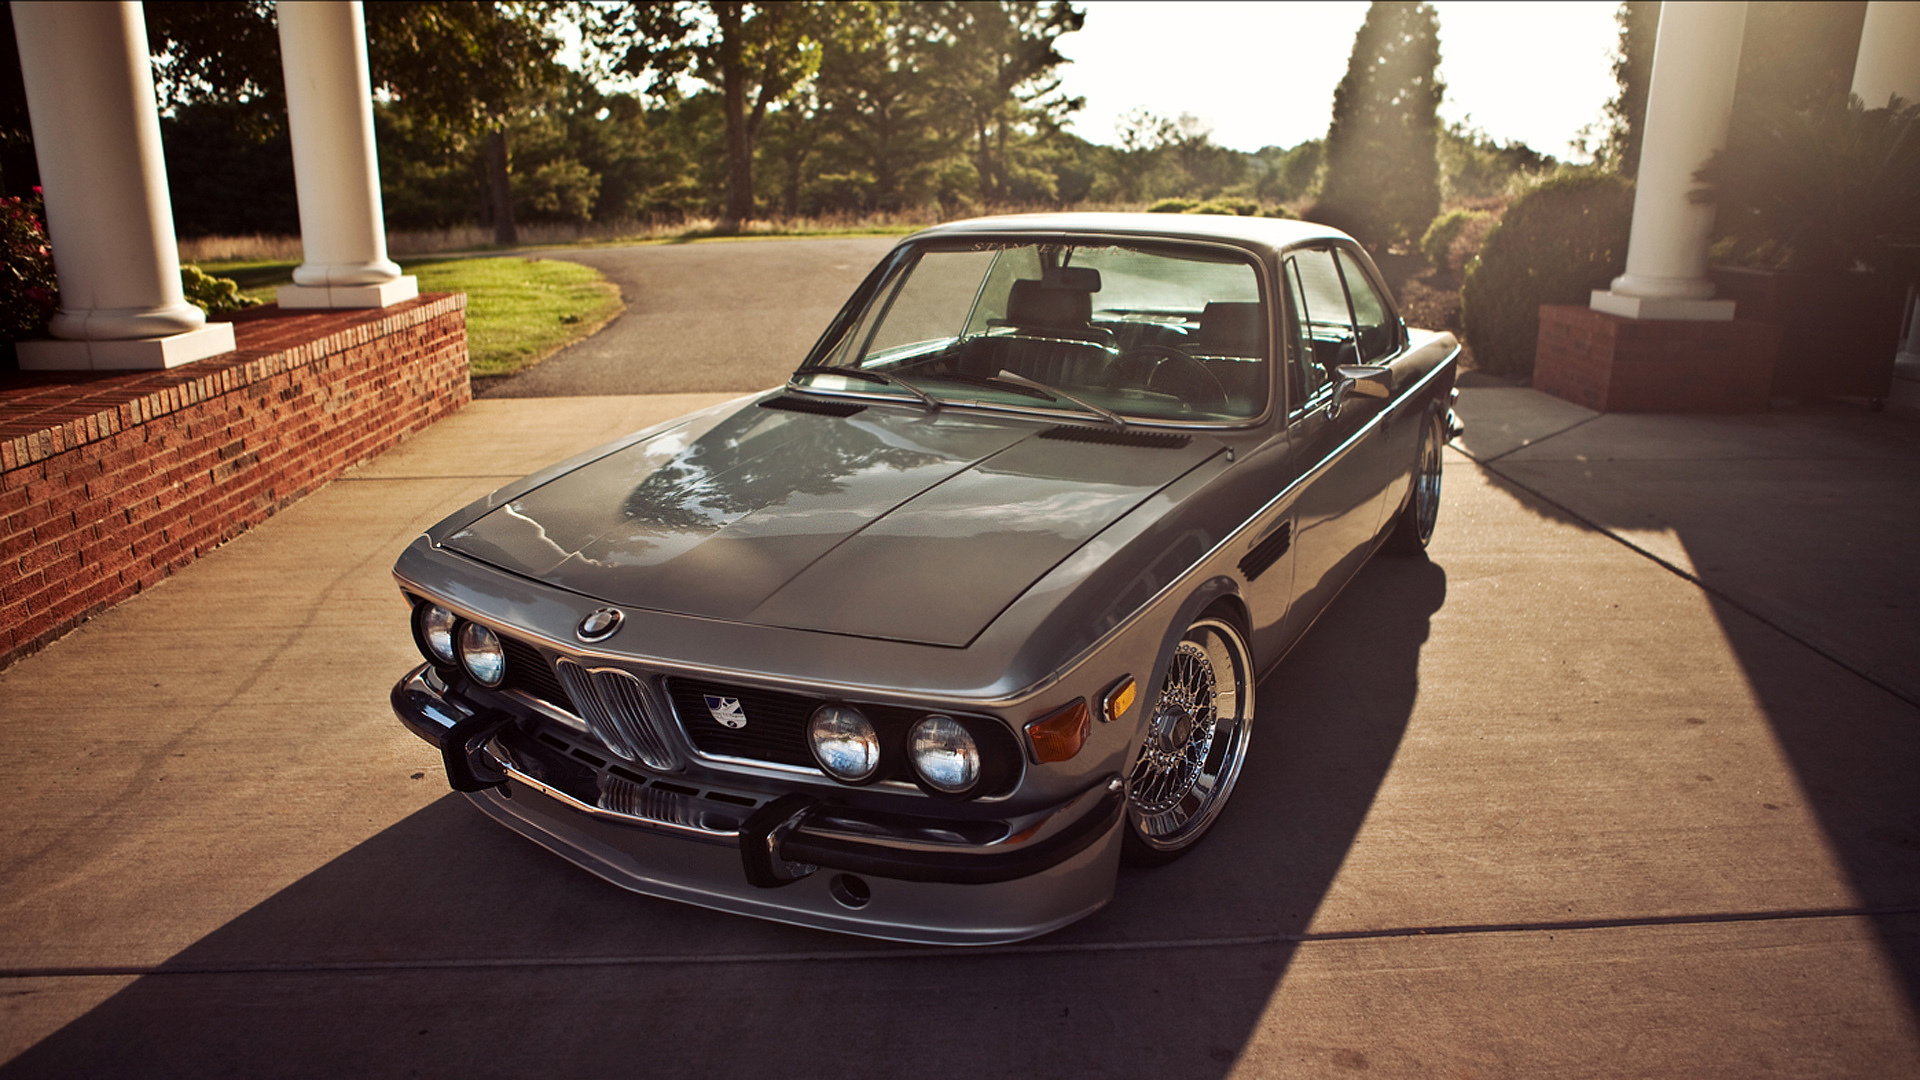 Old Bmw Car Wallpaper For Pc HD Site